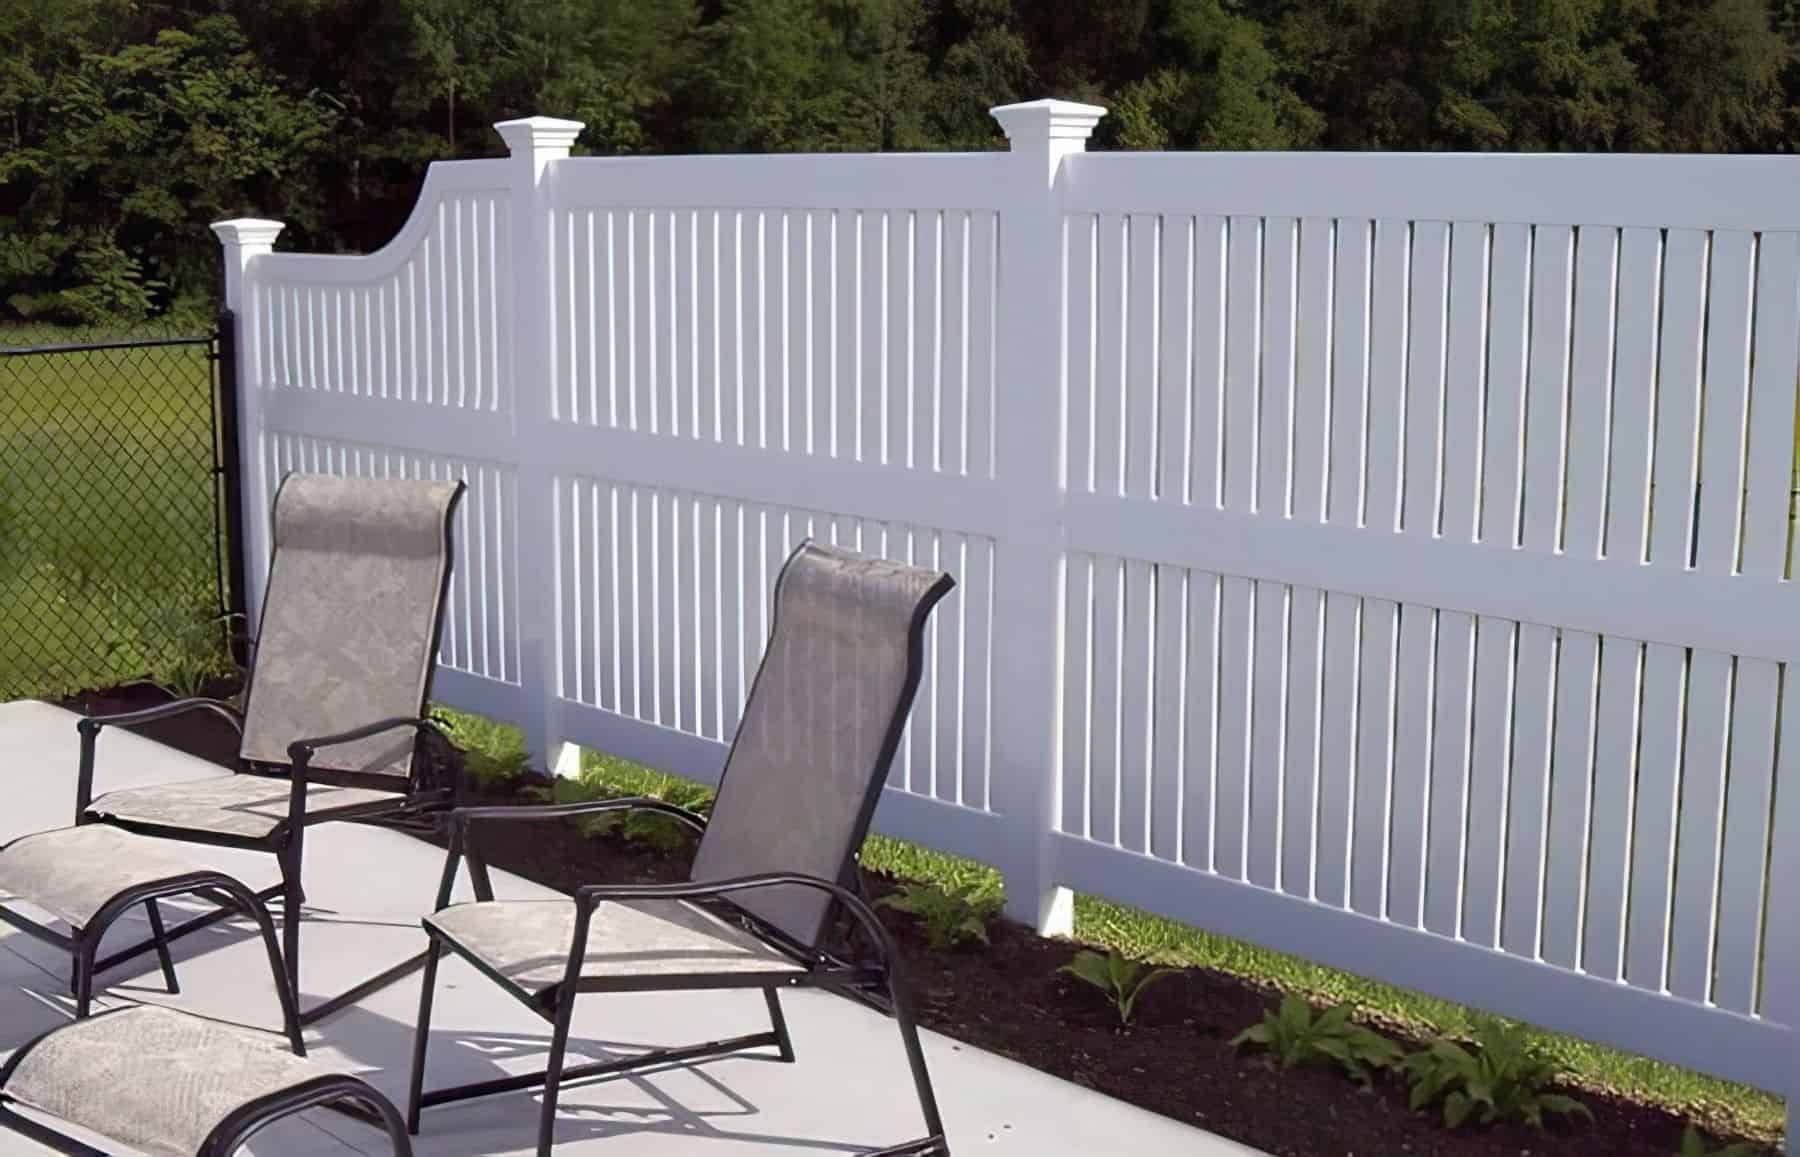 Stylish vinyl semi-privacy fence next to small shrubs and short metal fence creating a boundary for the home.